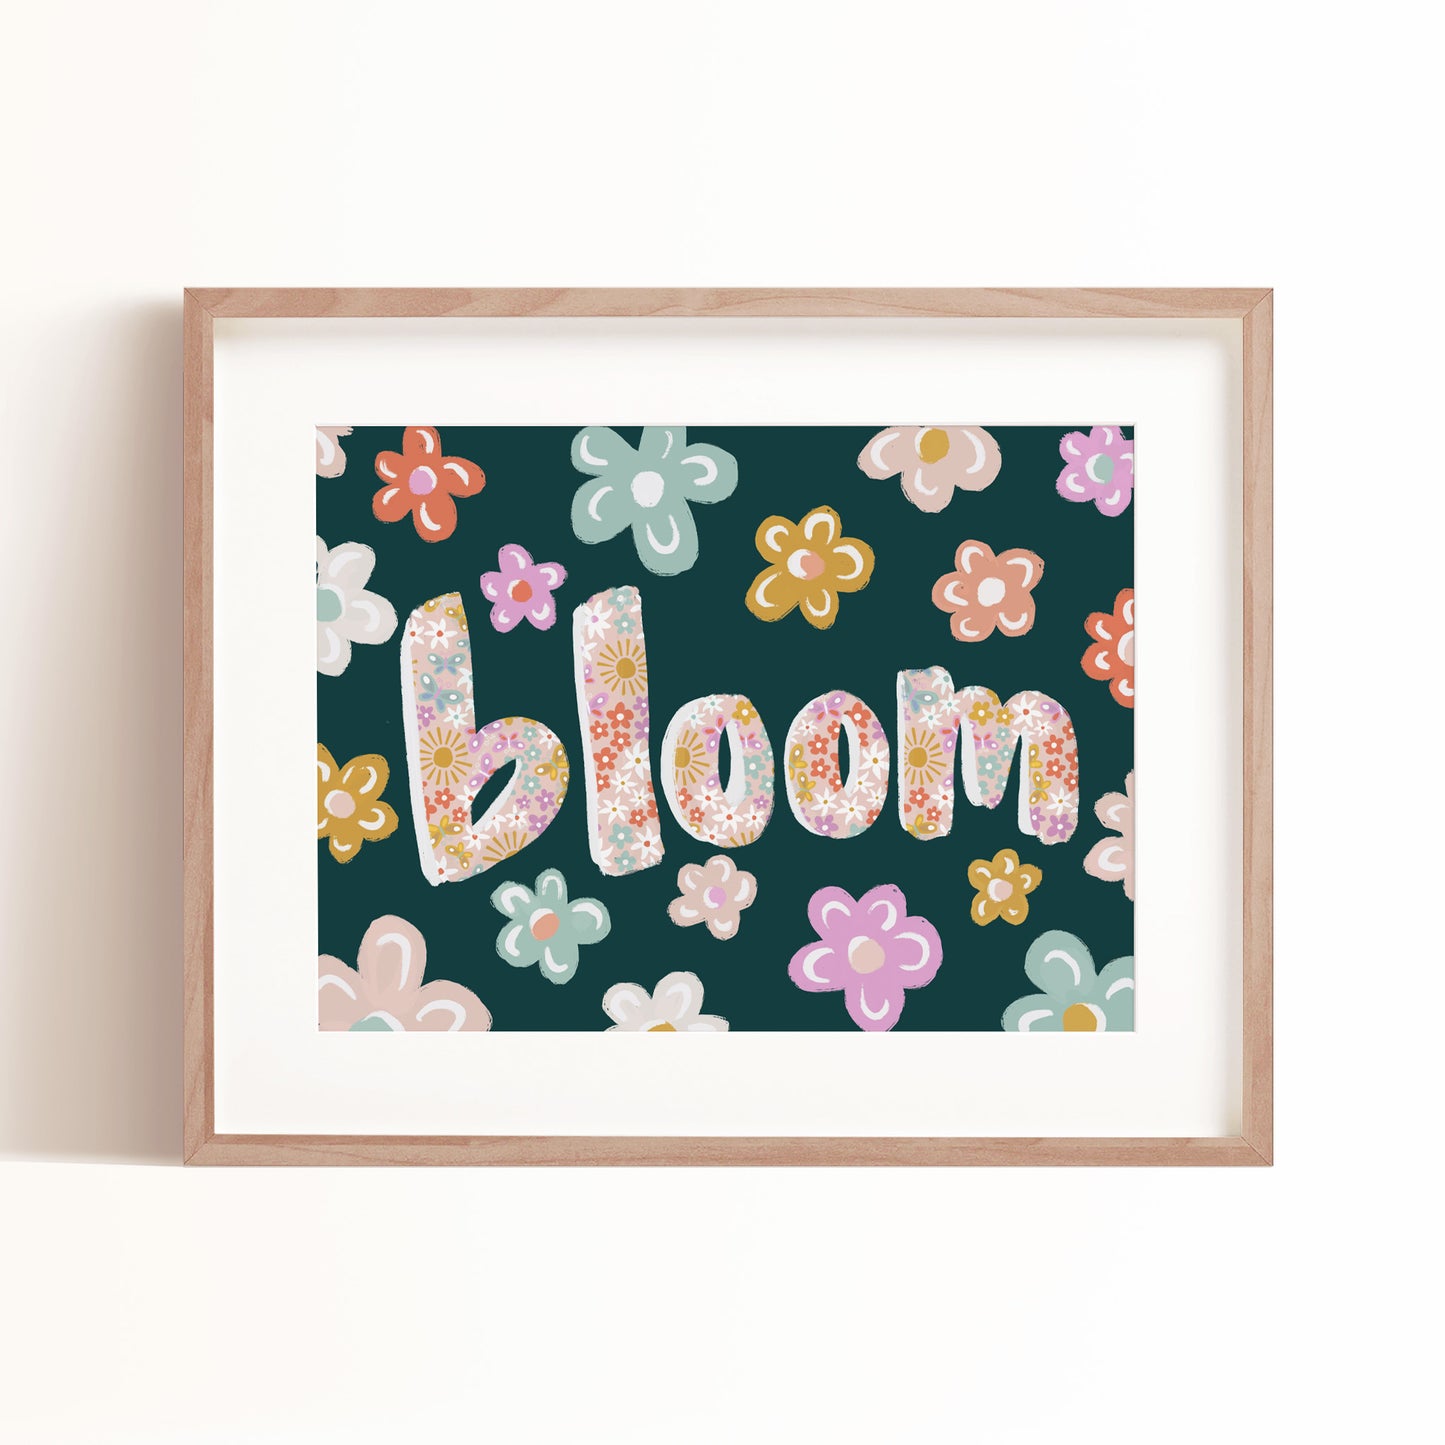 Our Bloom art print pictured in a frame is sure to inspire your loved ones with it's bold and colorful letters.